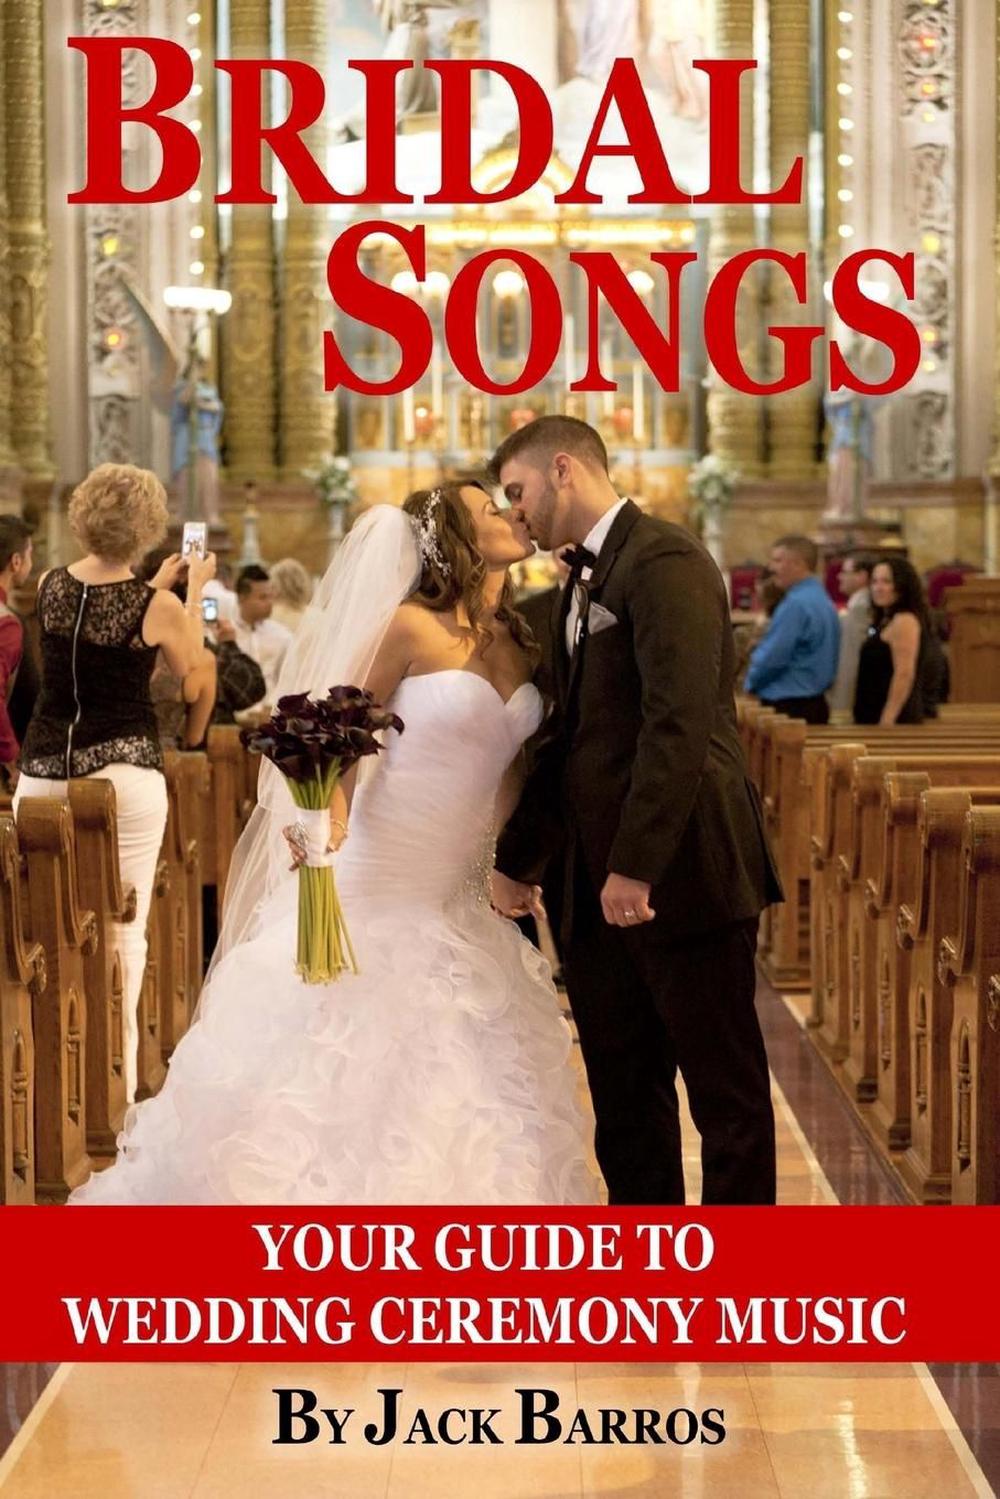 Bridal Songs Your Guide to Wedding Ceremony Music by Jack Barros